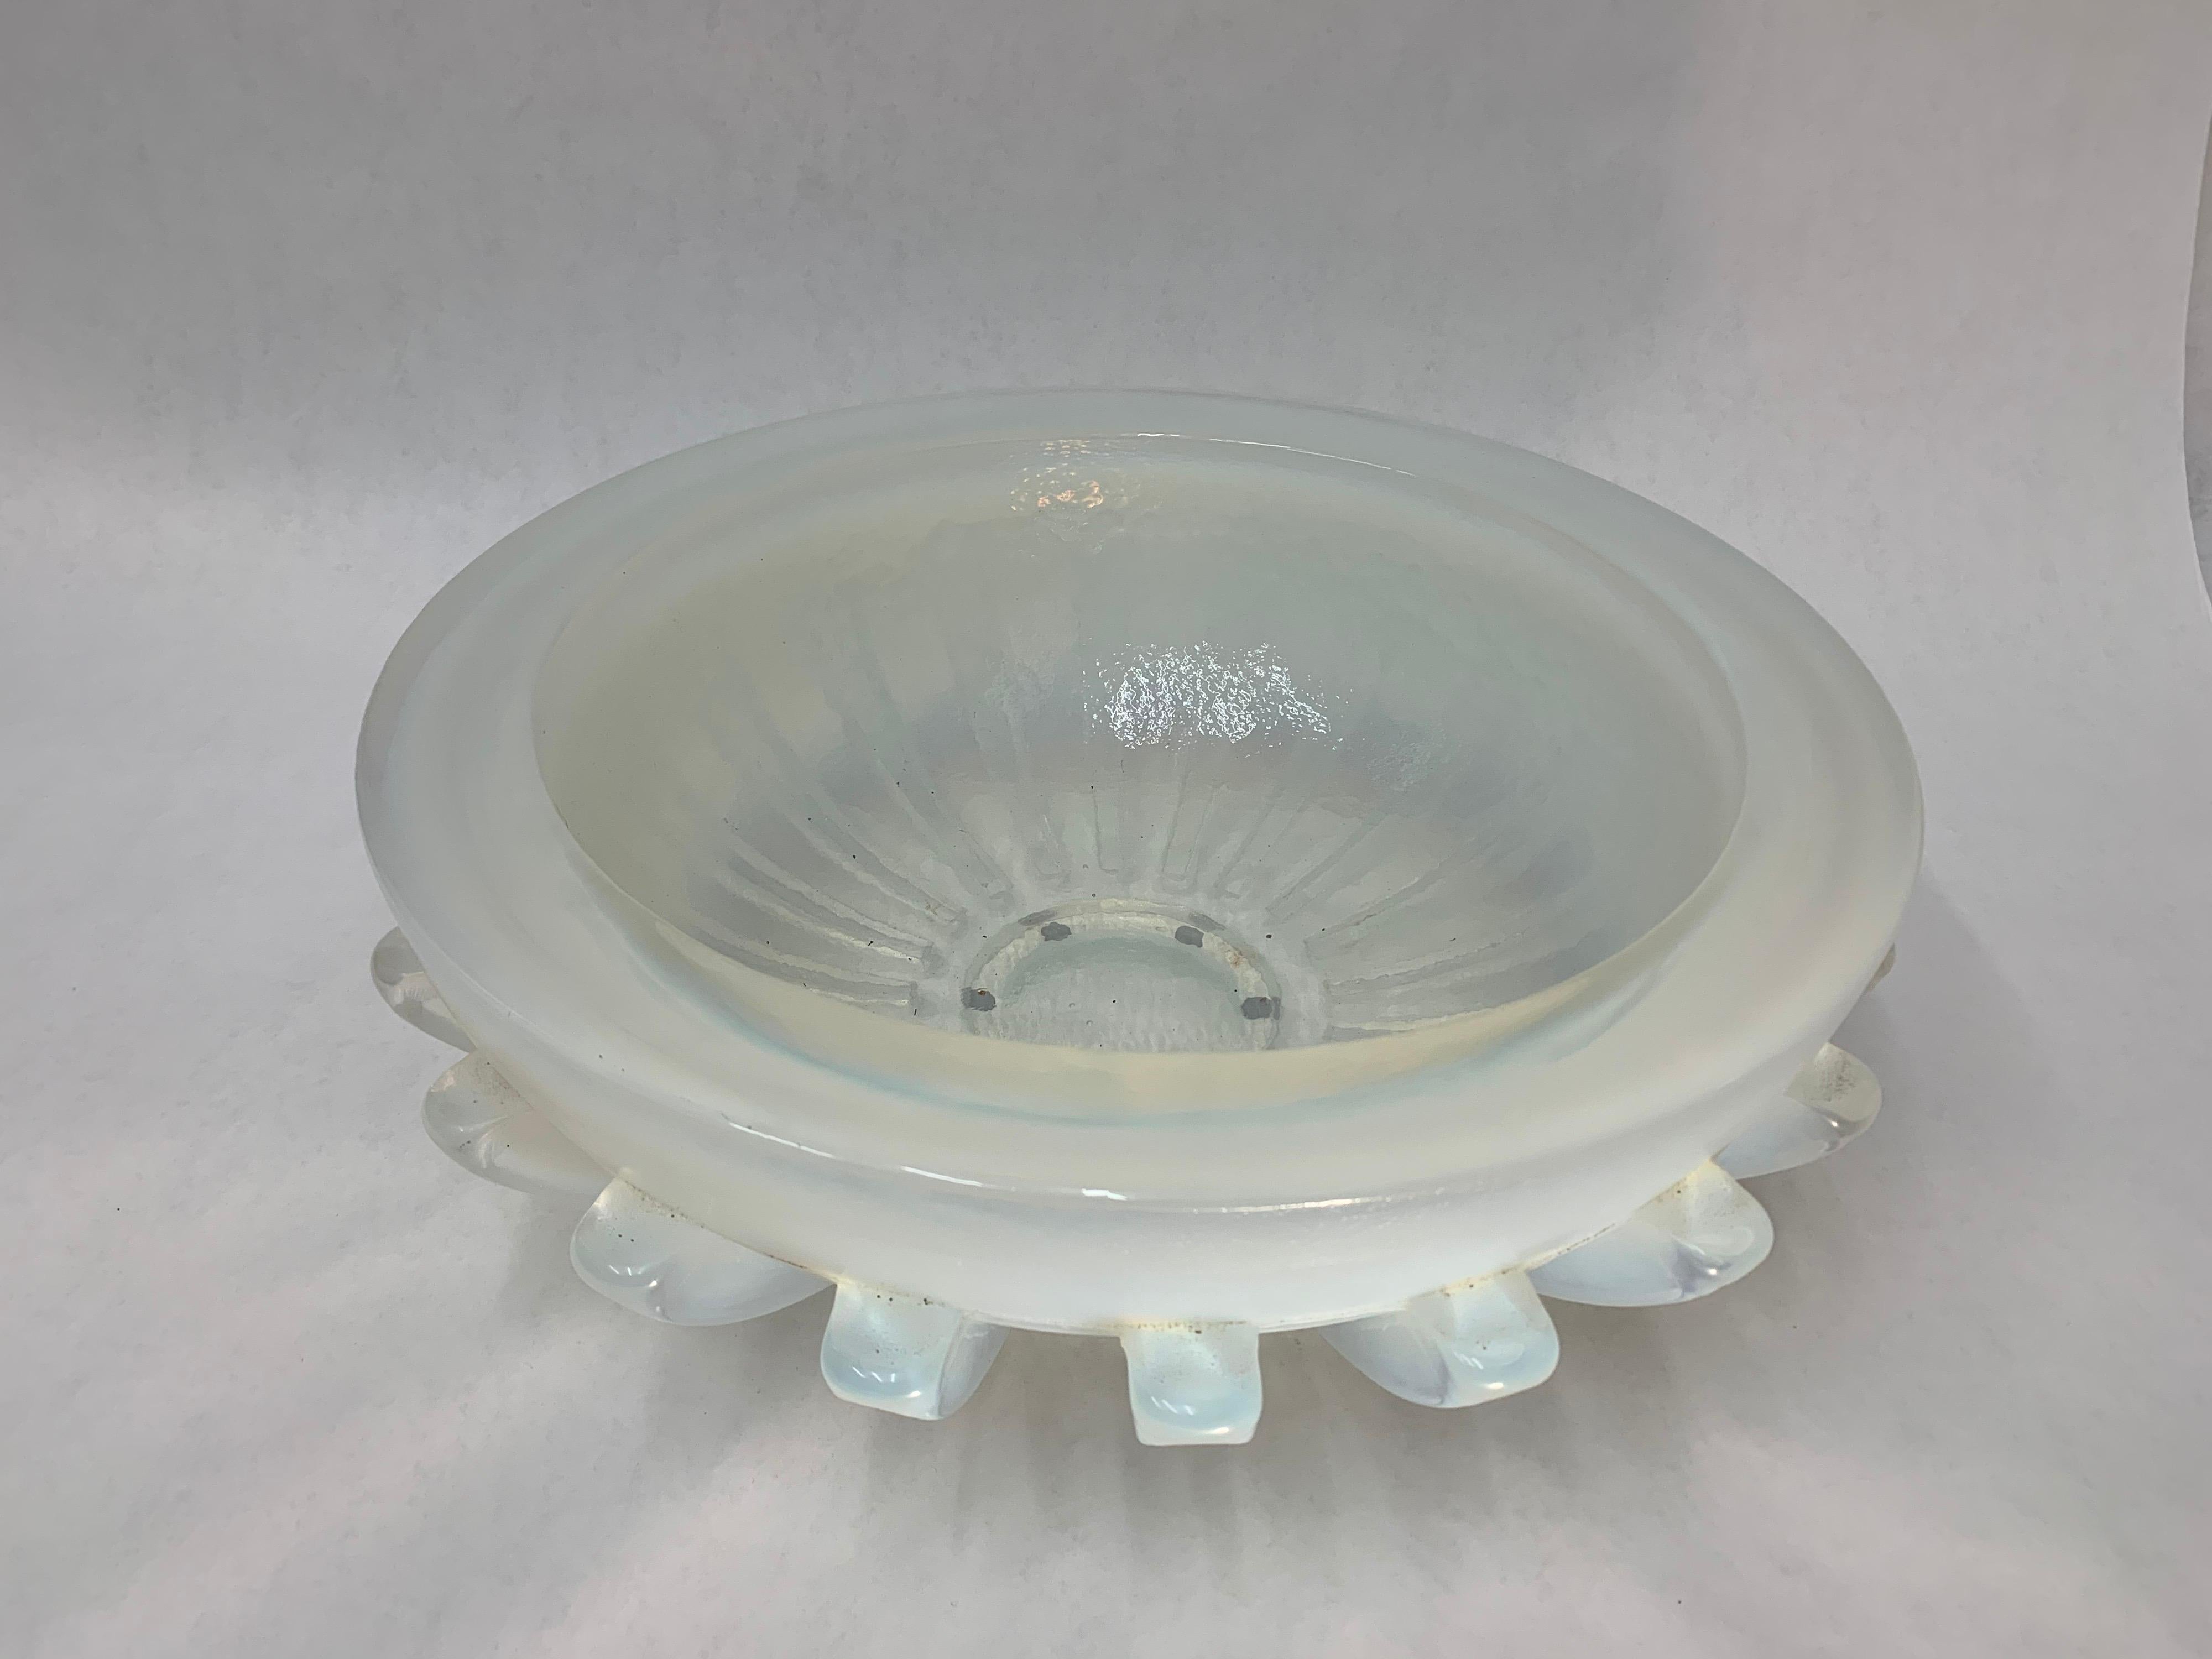 Massive Iridescent Opaline Murano Glass Bowl with Buttress Accents 1